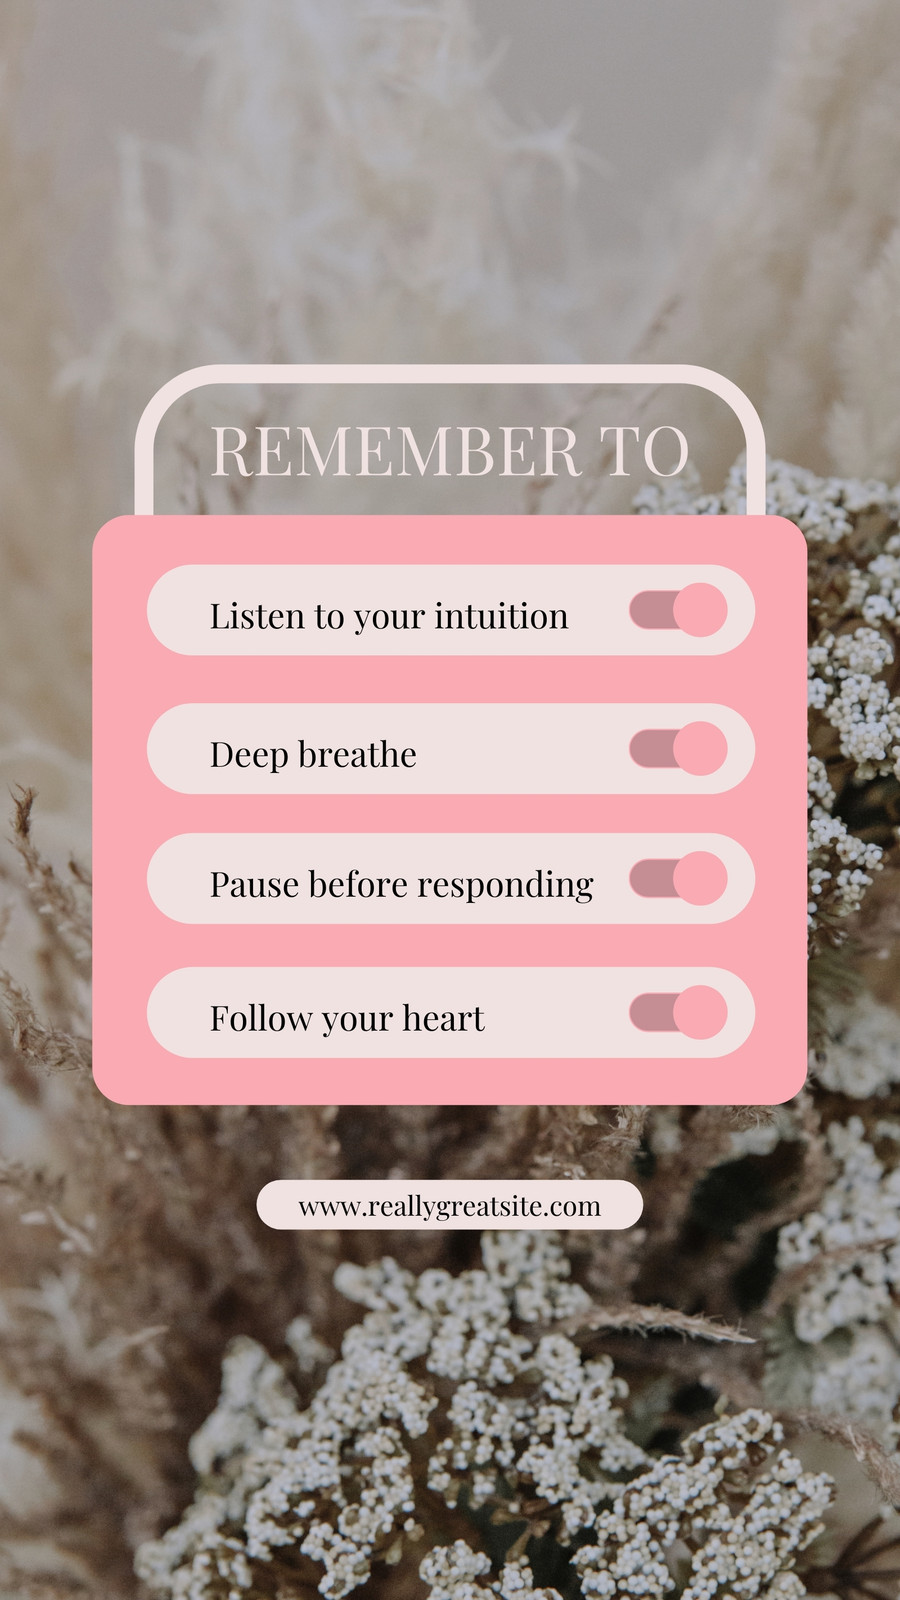 Free and customizable self care templates